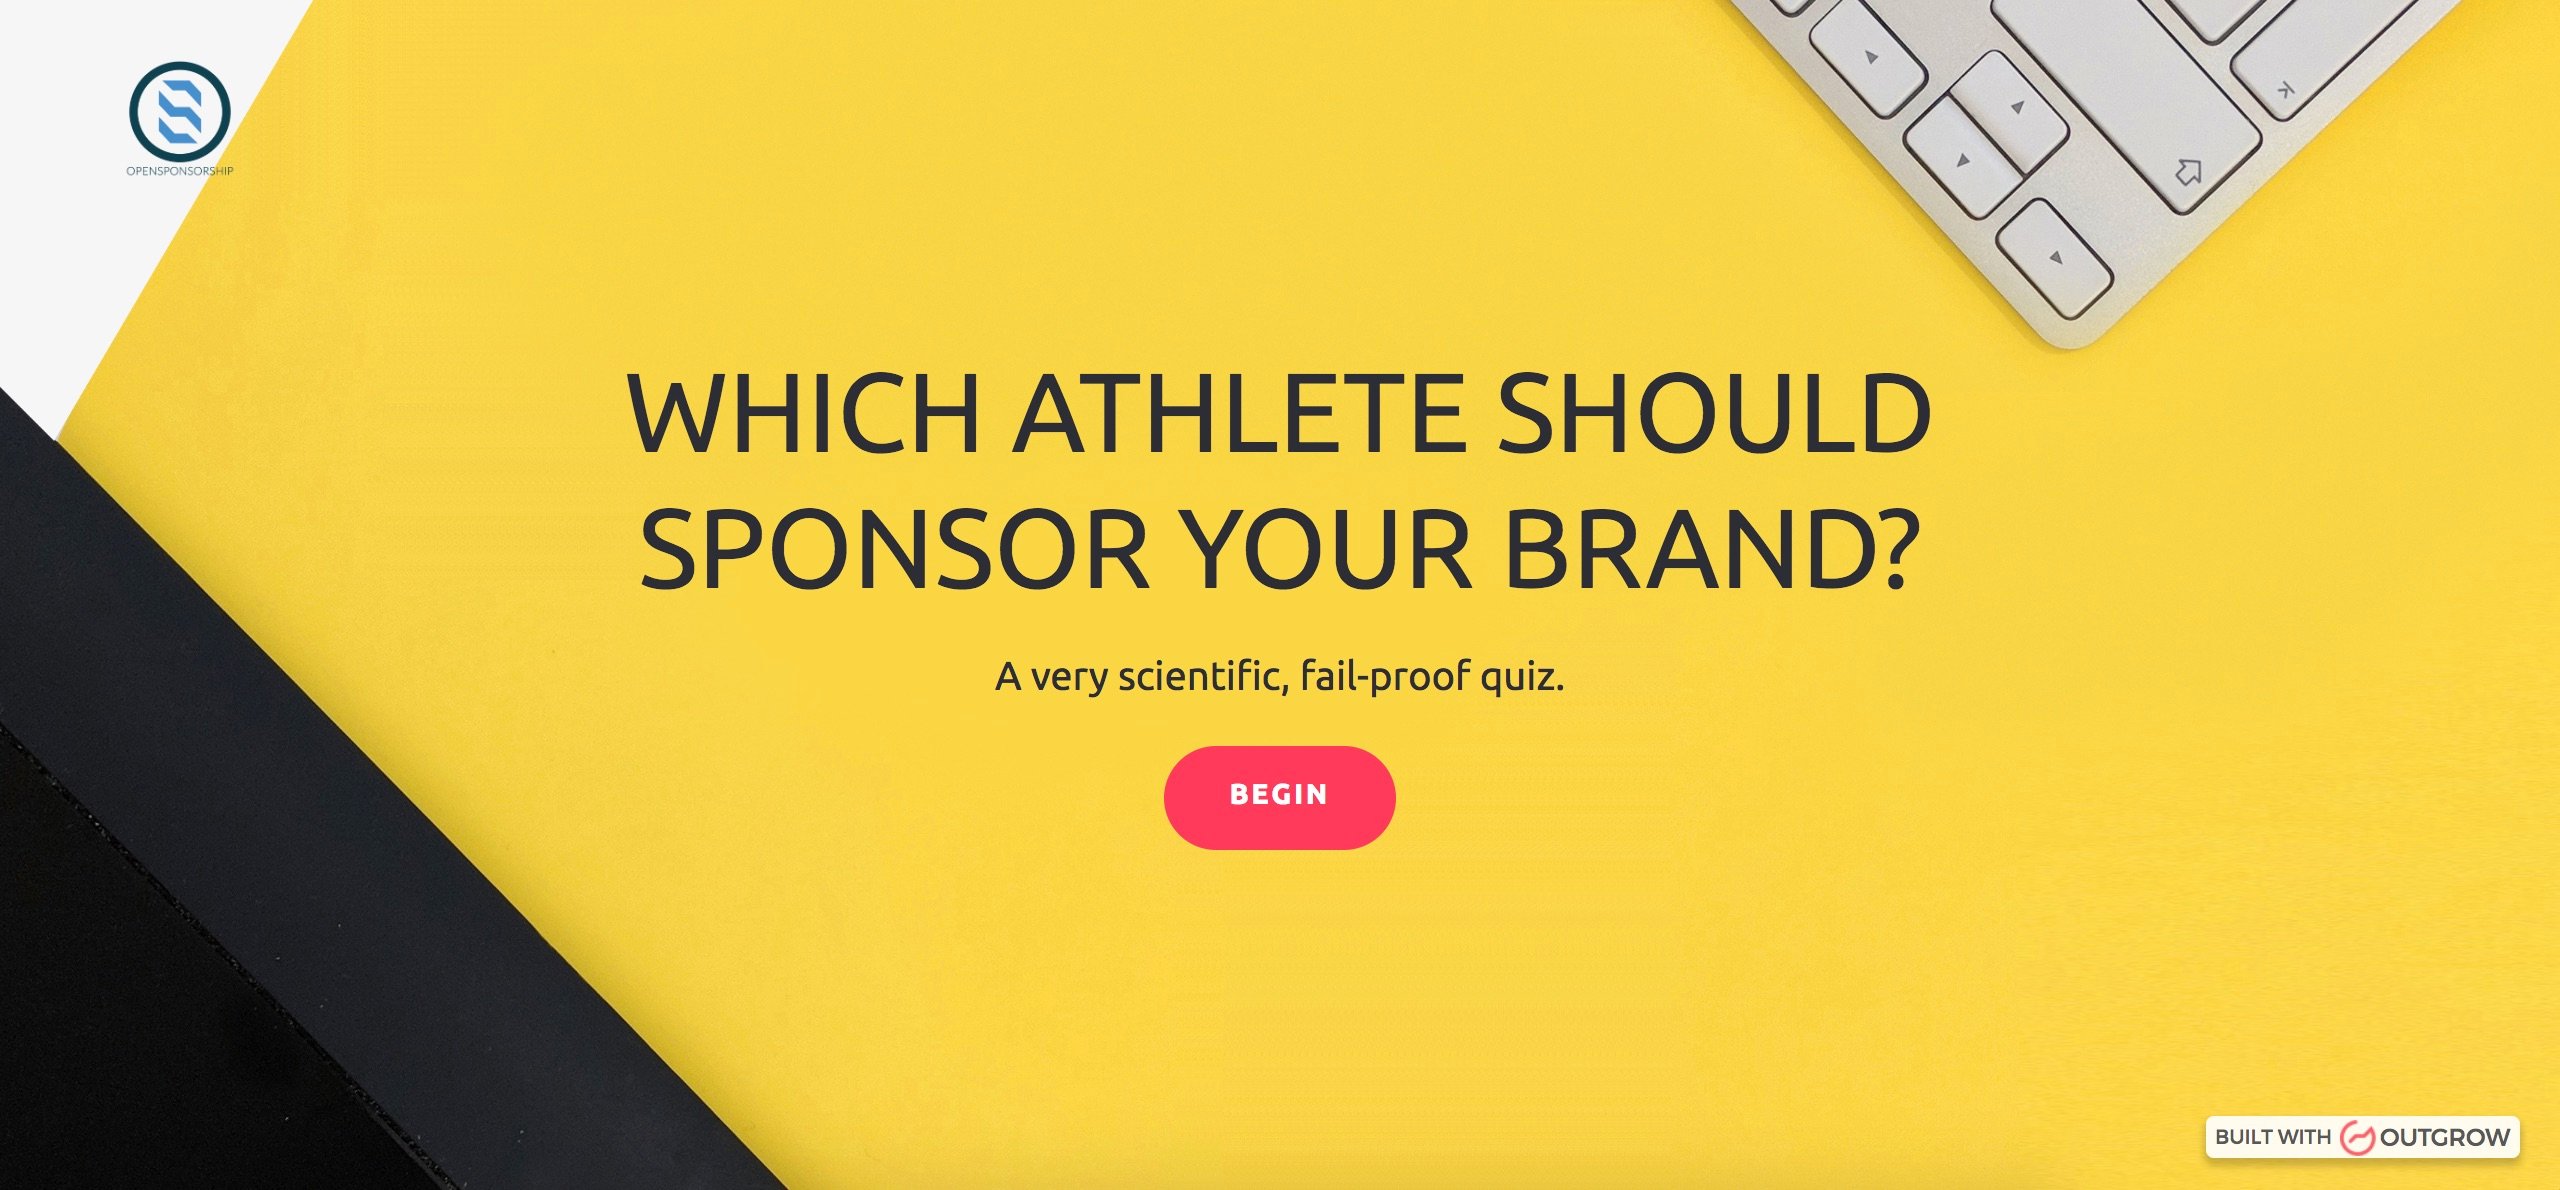 which athlete should sponsor your brand